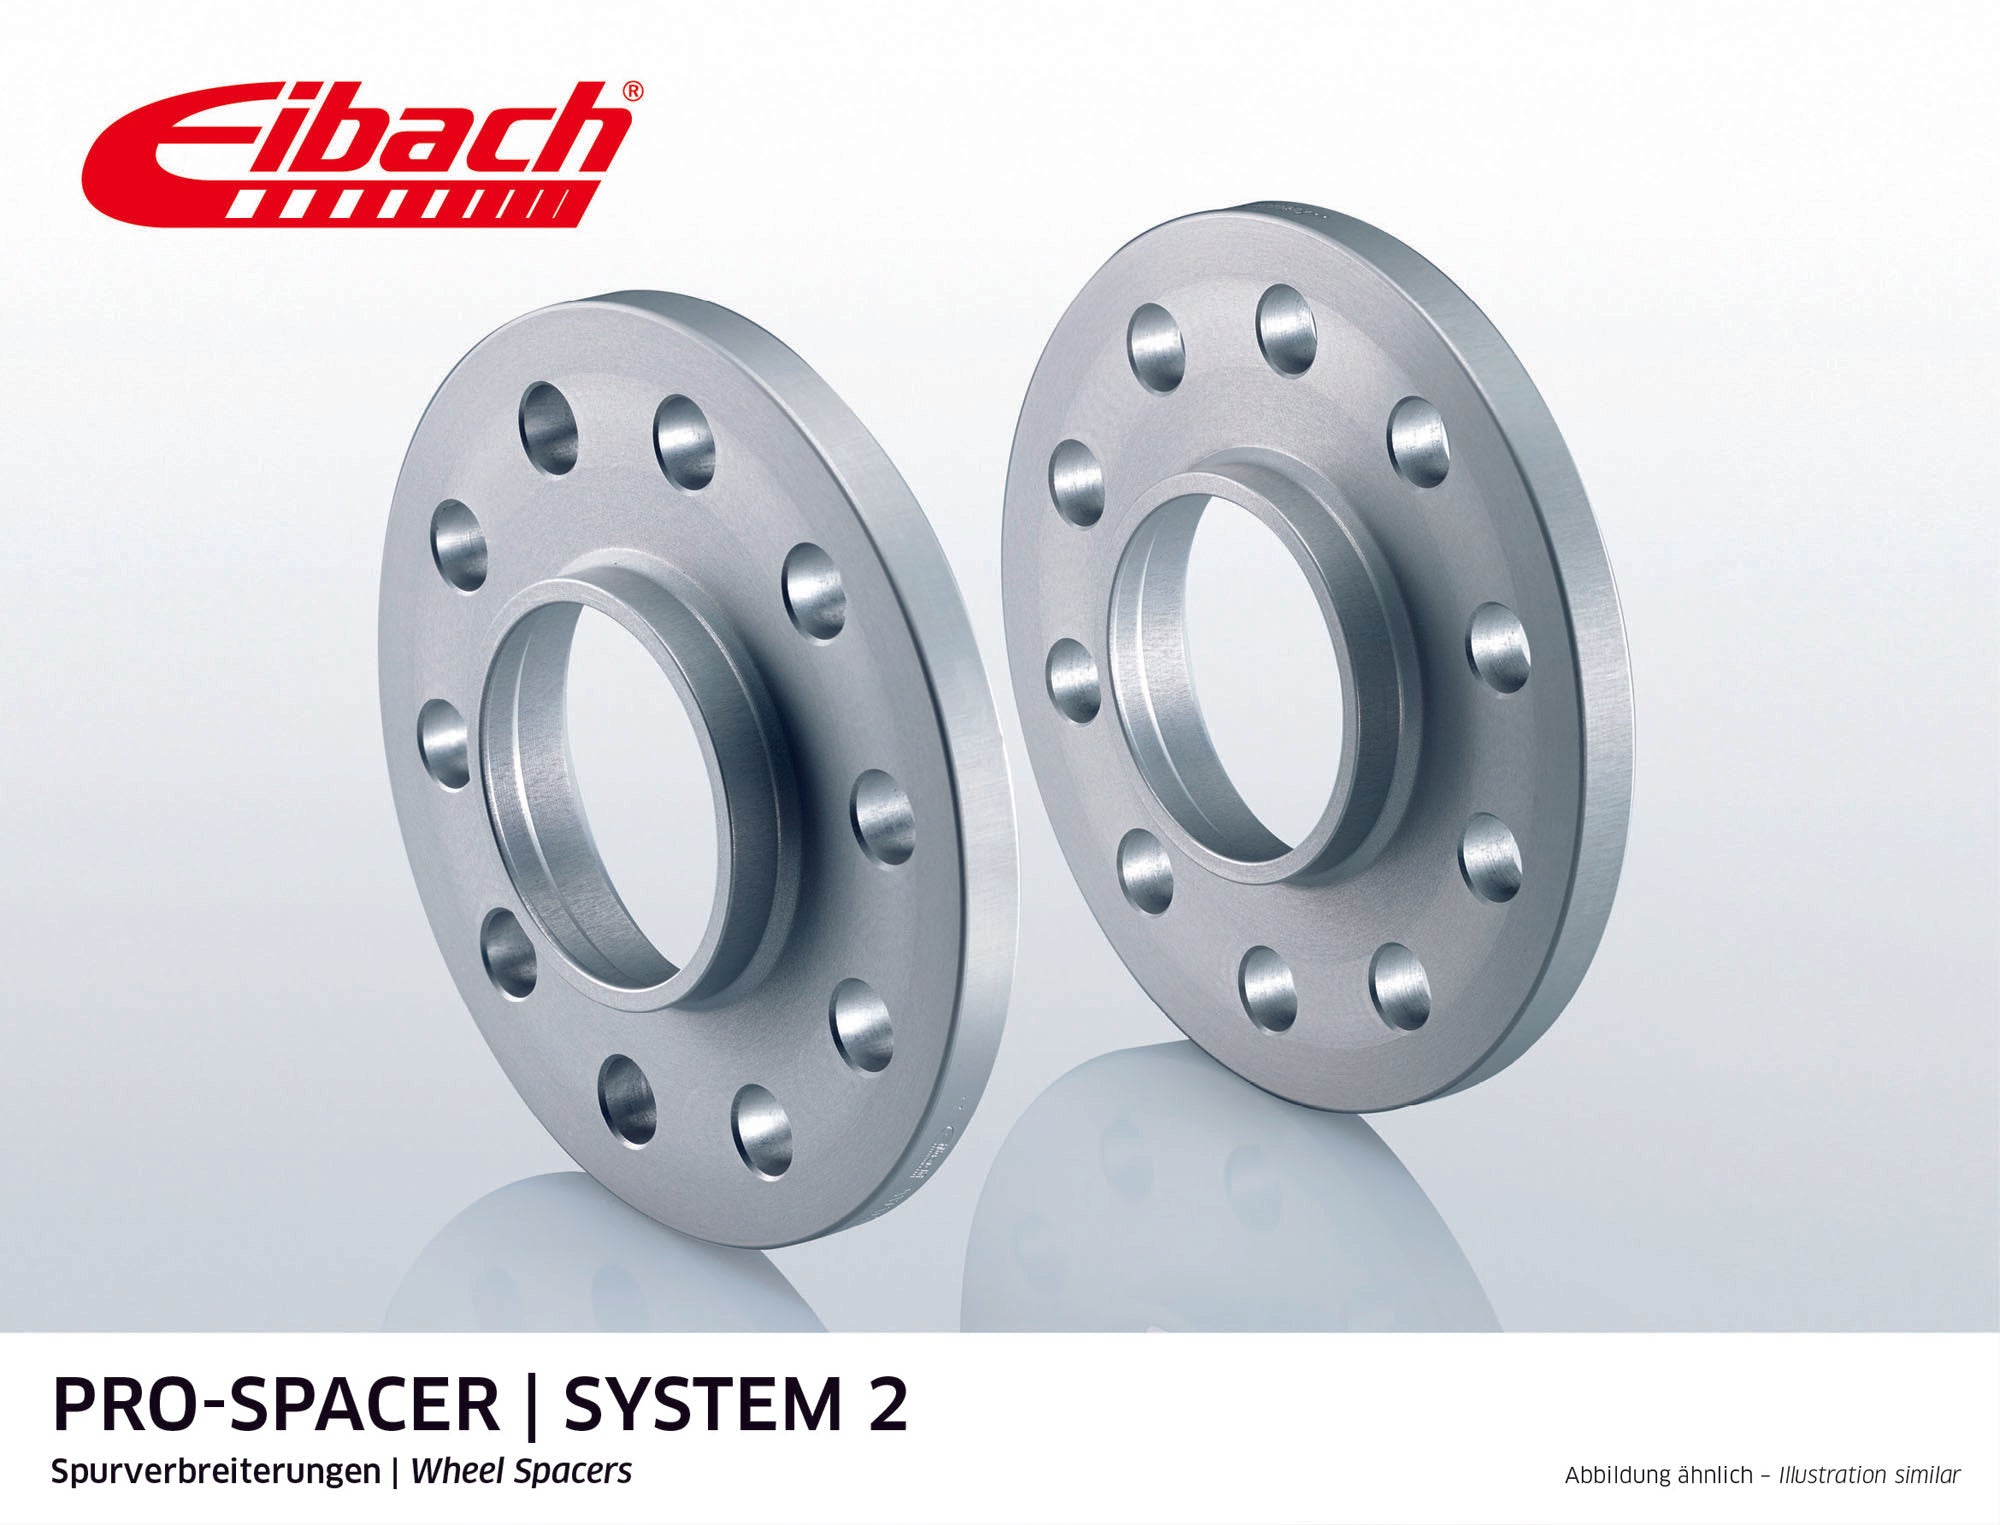 Eibach 7mm Pro-Spacer - Silver Anodized Wheel Spacer CAYMAN 2005-12 #S90-2-07-001